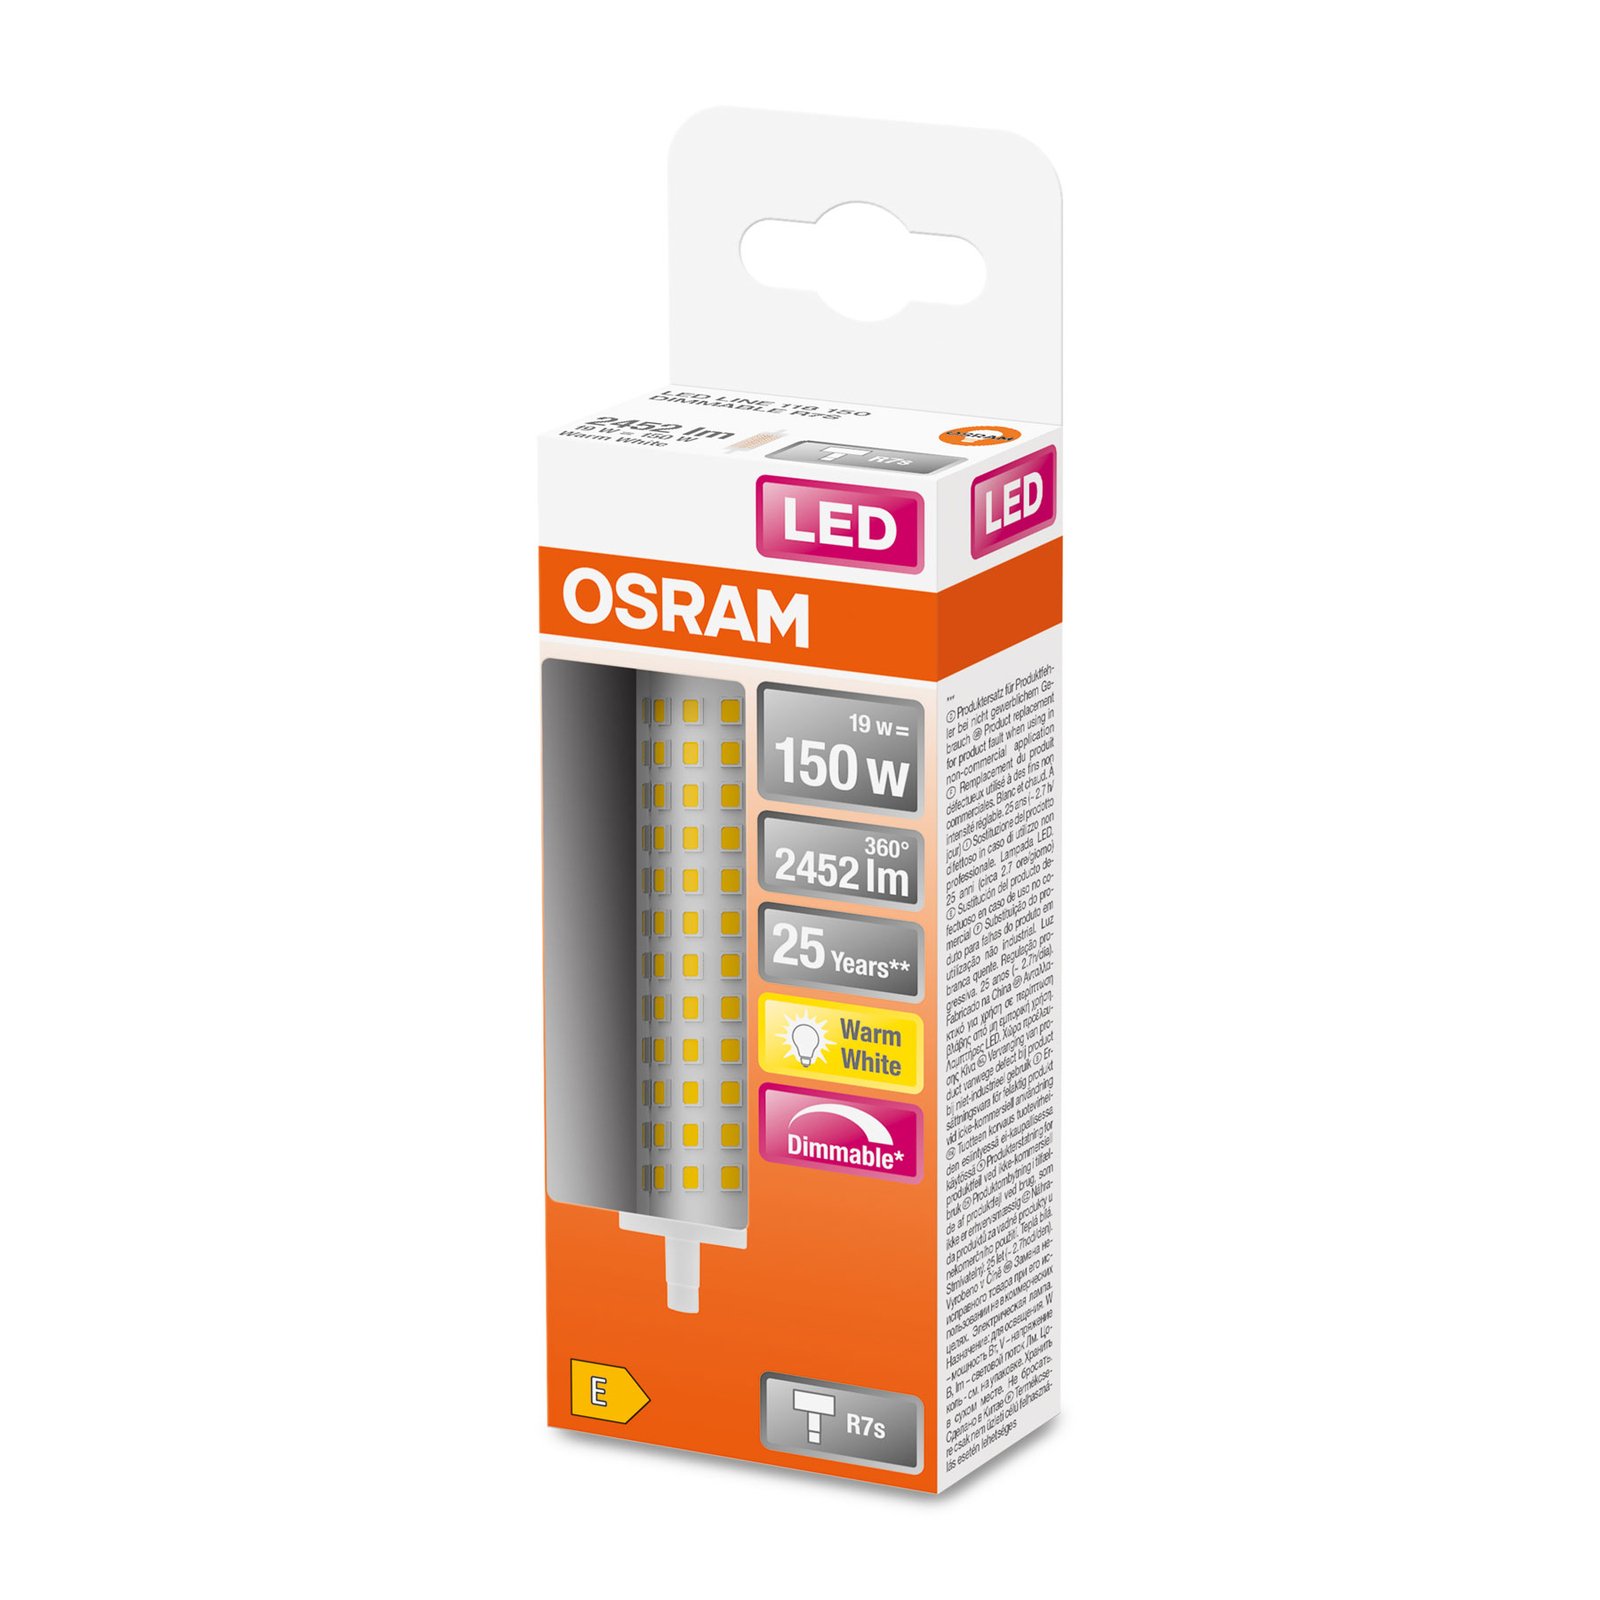 OSRAM ampoule LED R7s 19 W 2 700 K dimmable